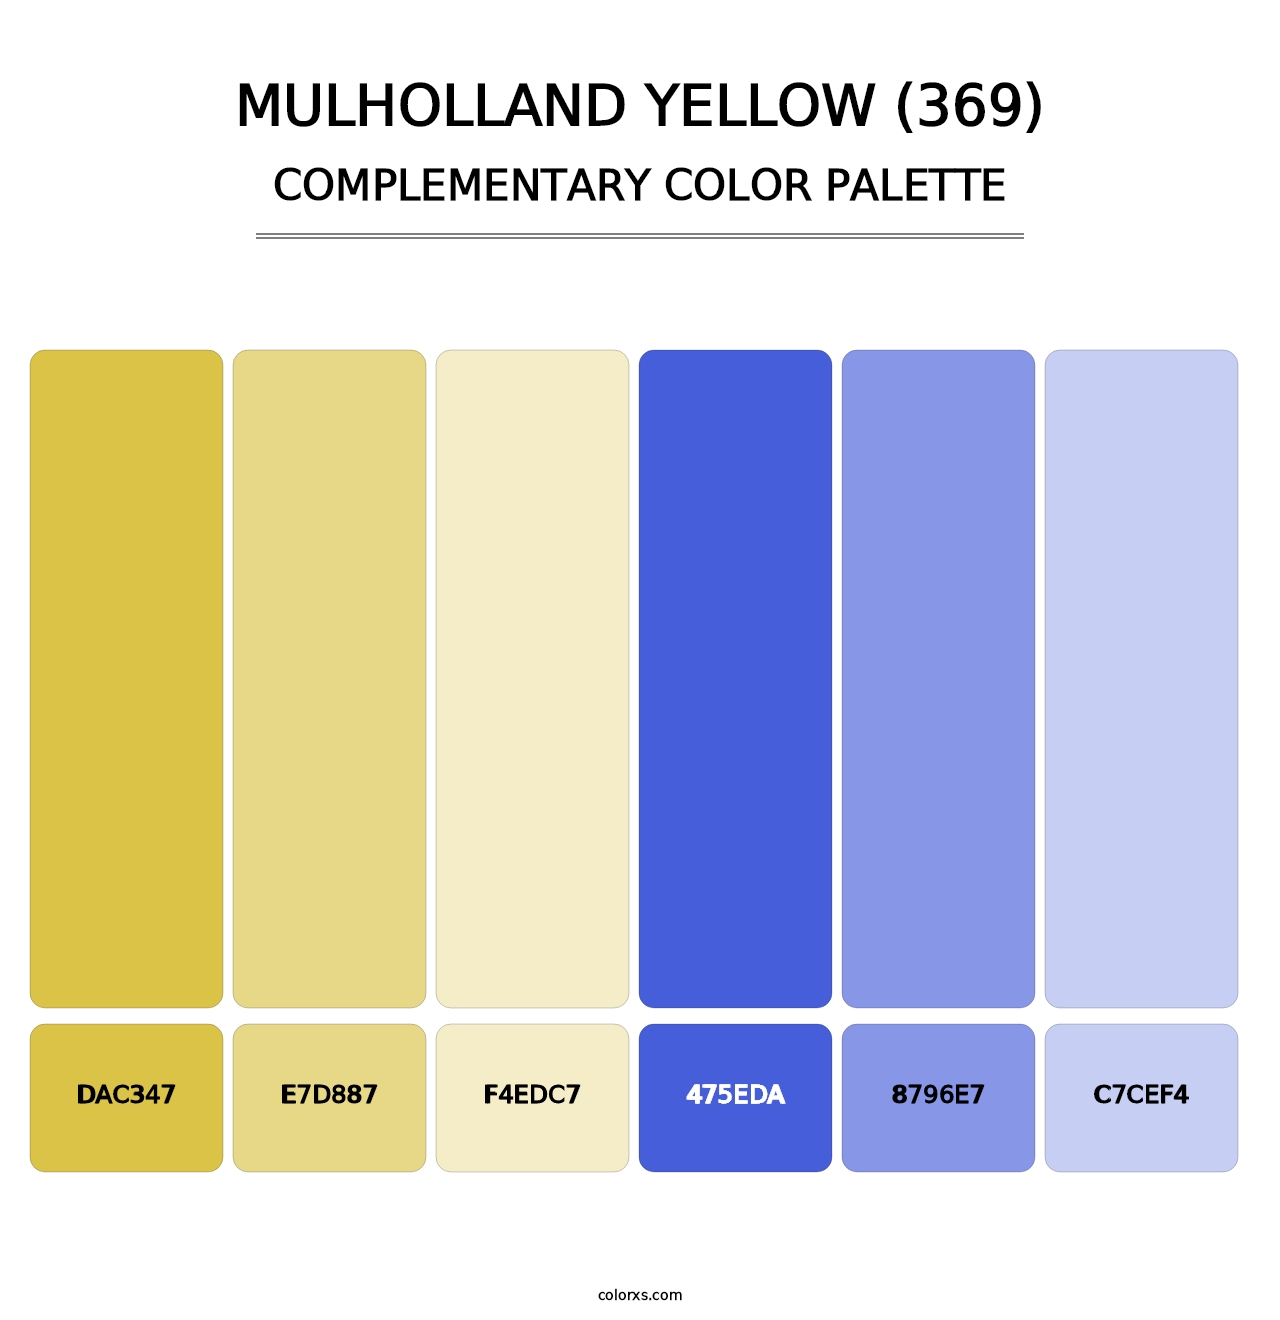 Mulholland Yellow (369) - Complementary Color Palette